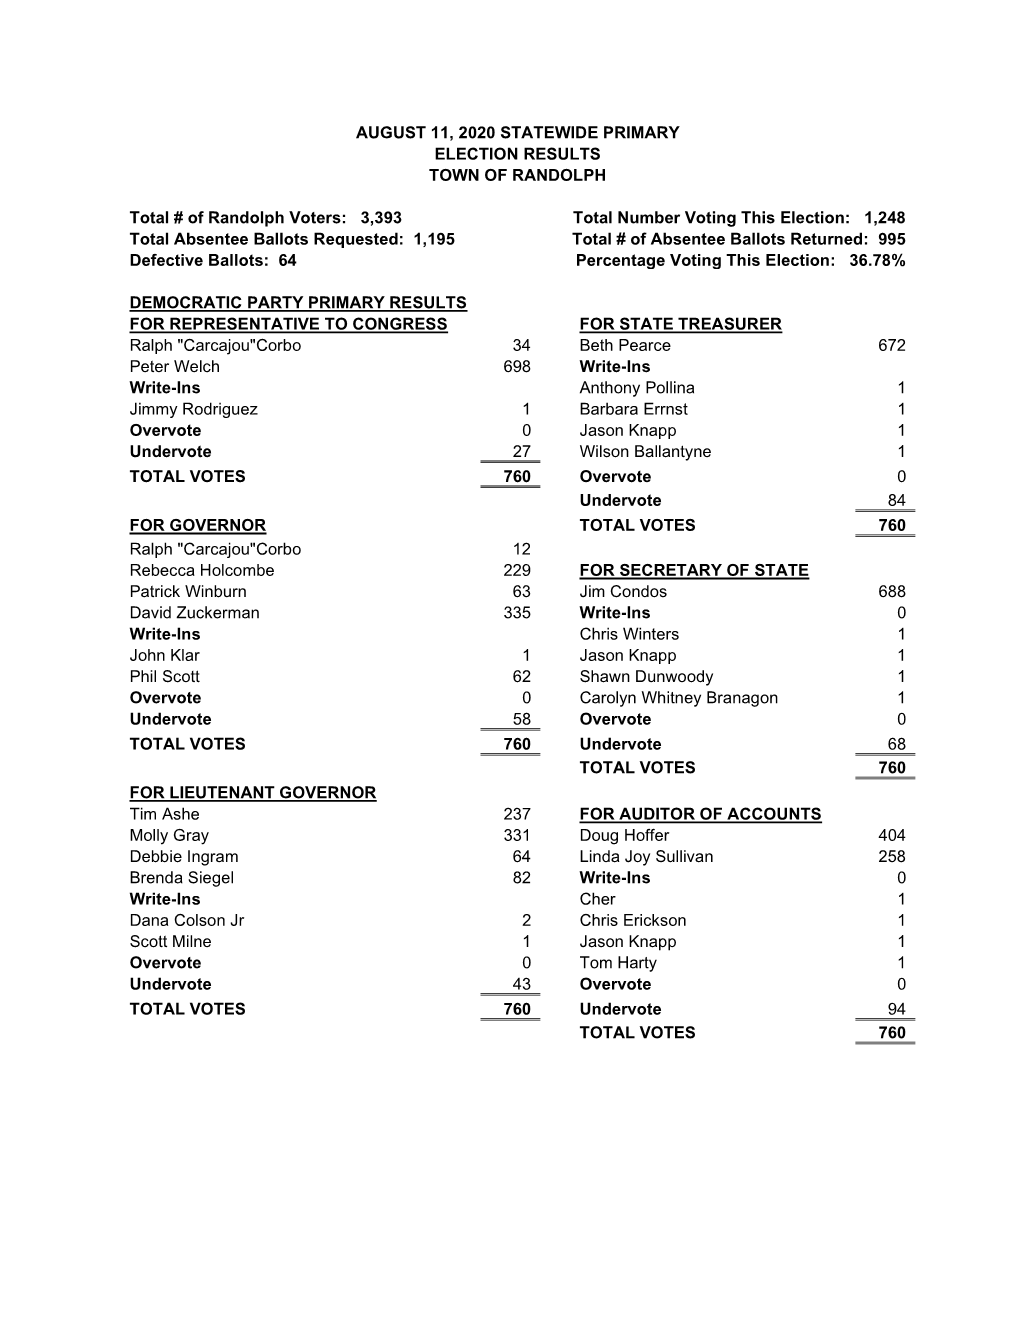 August 11, 2020 Statewide Primary Election Results Town of Randolph